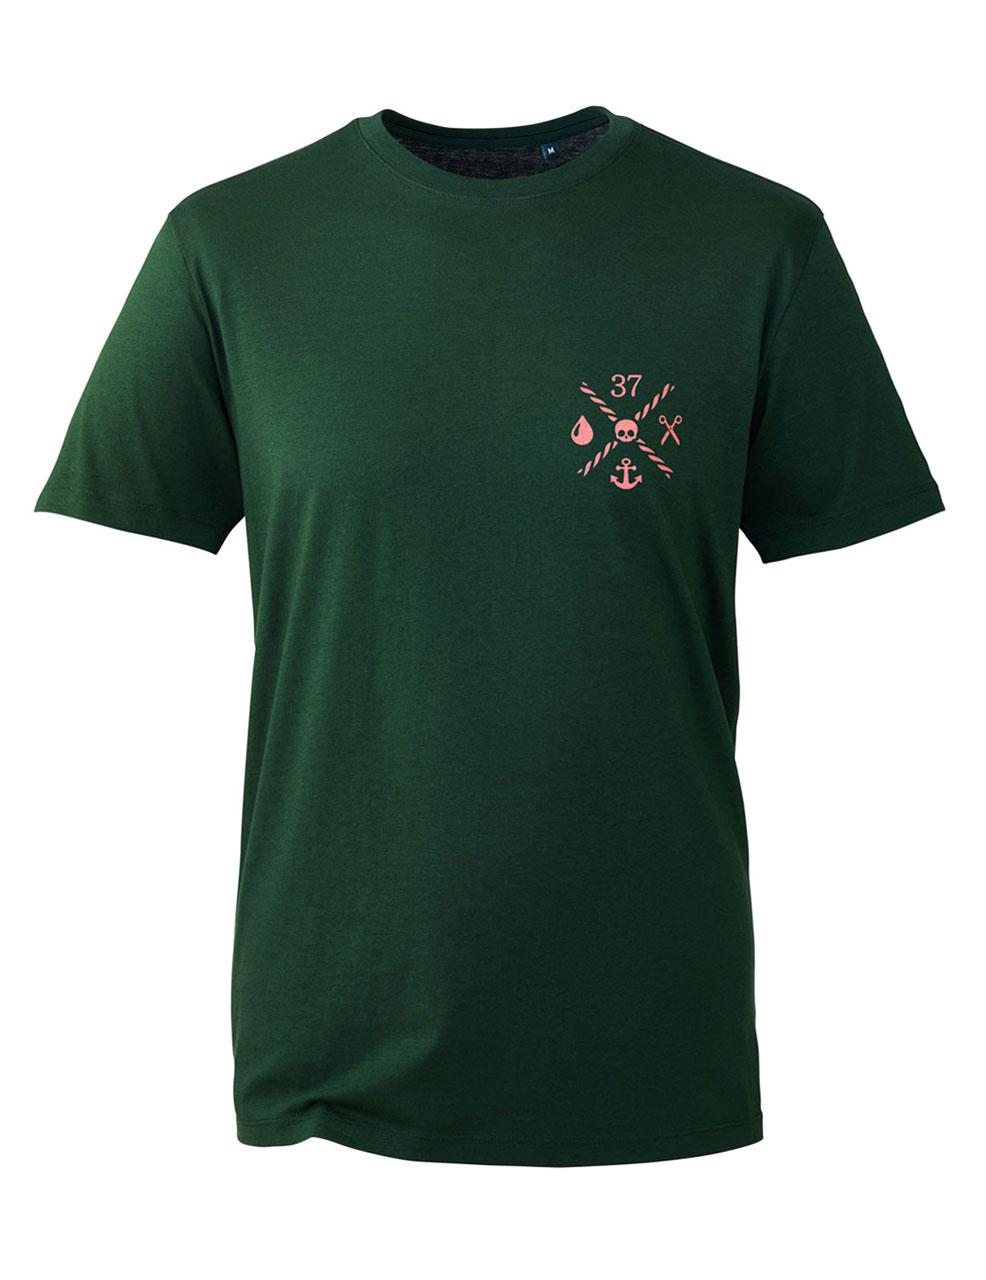 Classic unisex T-shirt in forest green with pink logo on the chest